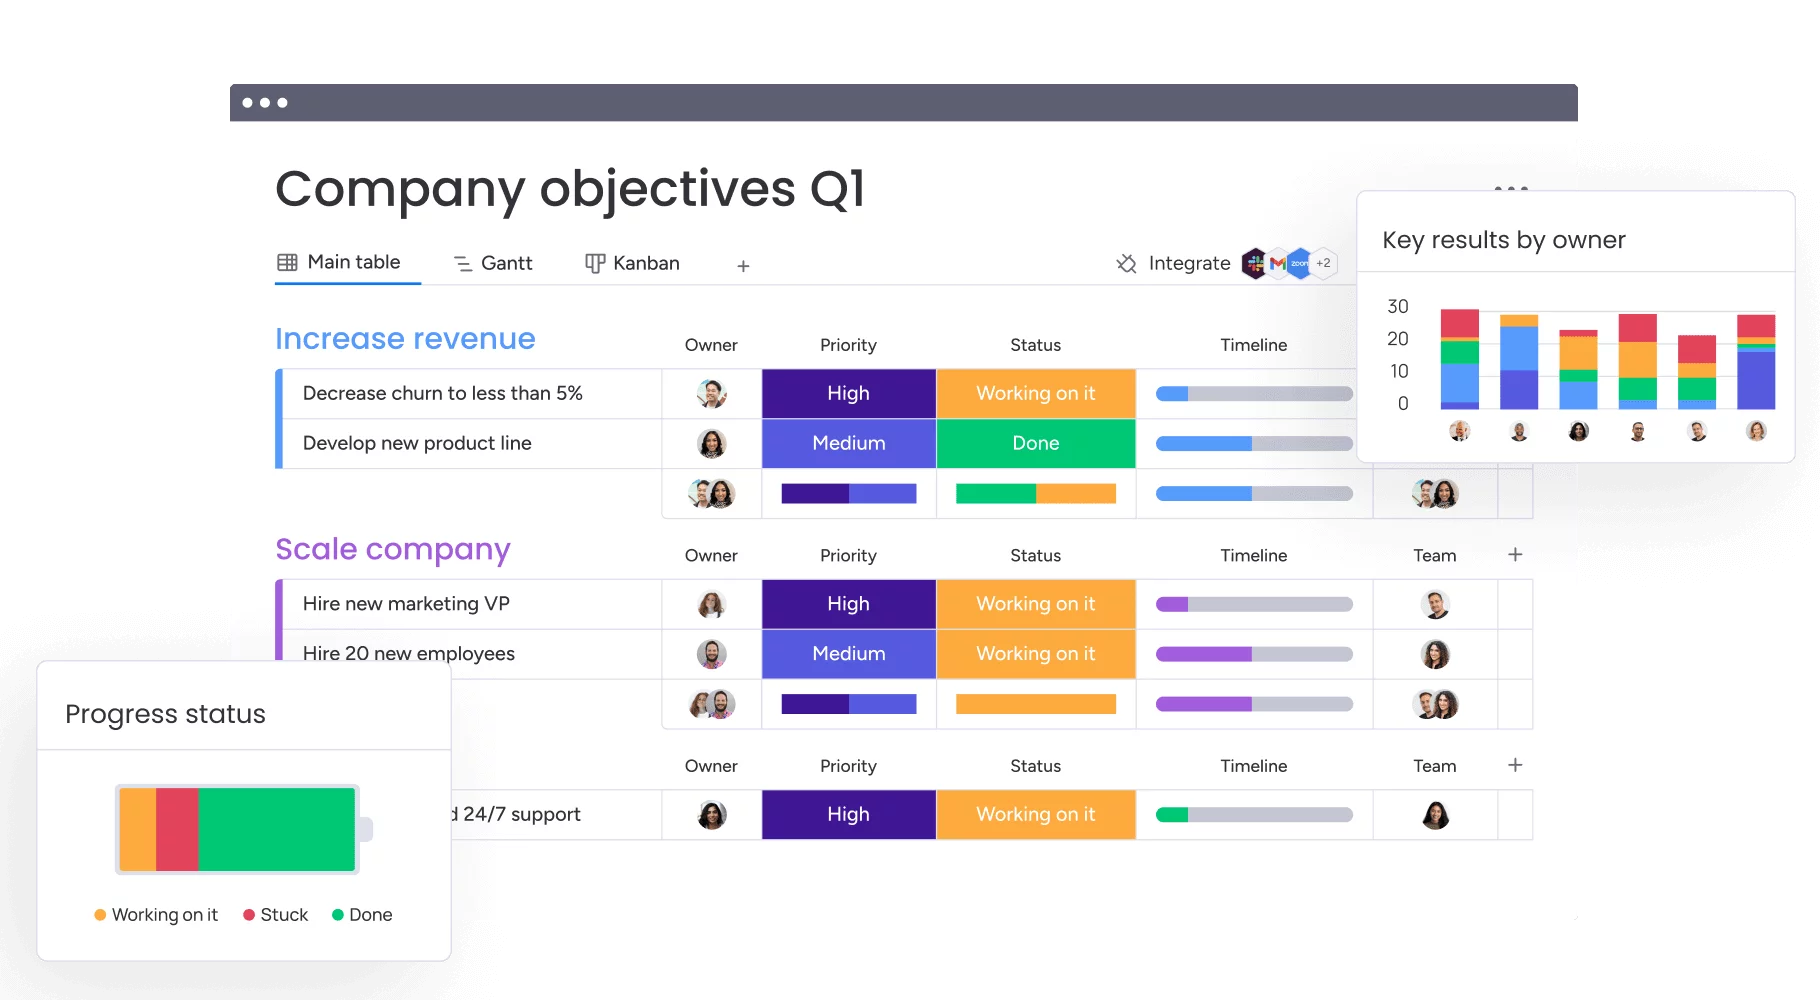 Marketing objectives dashboard in Monday including progress status, key results with owner, priority and status.